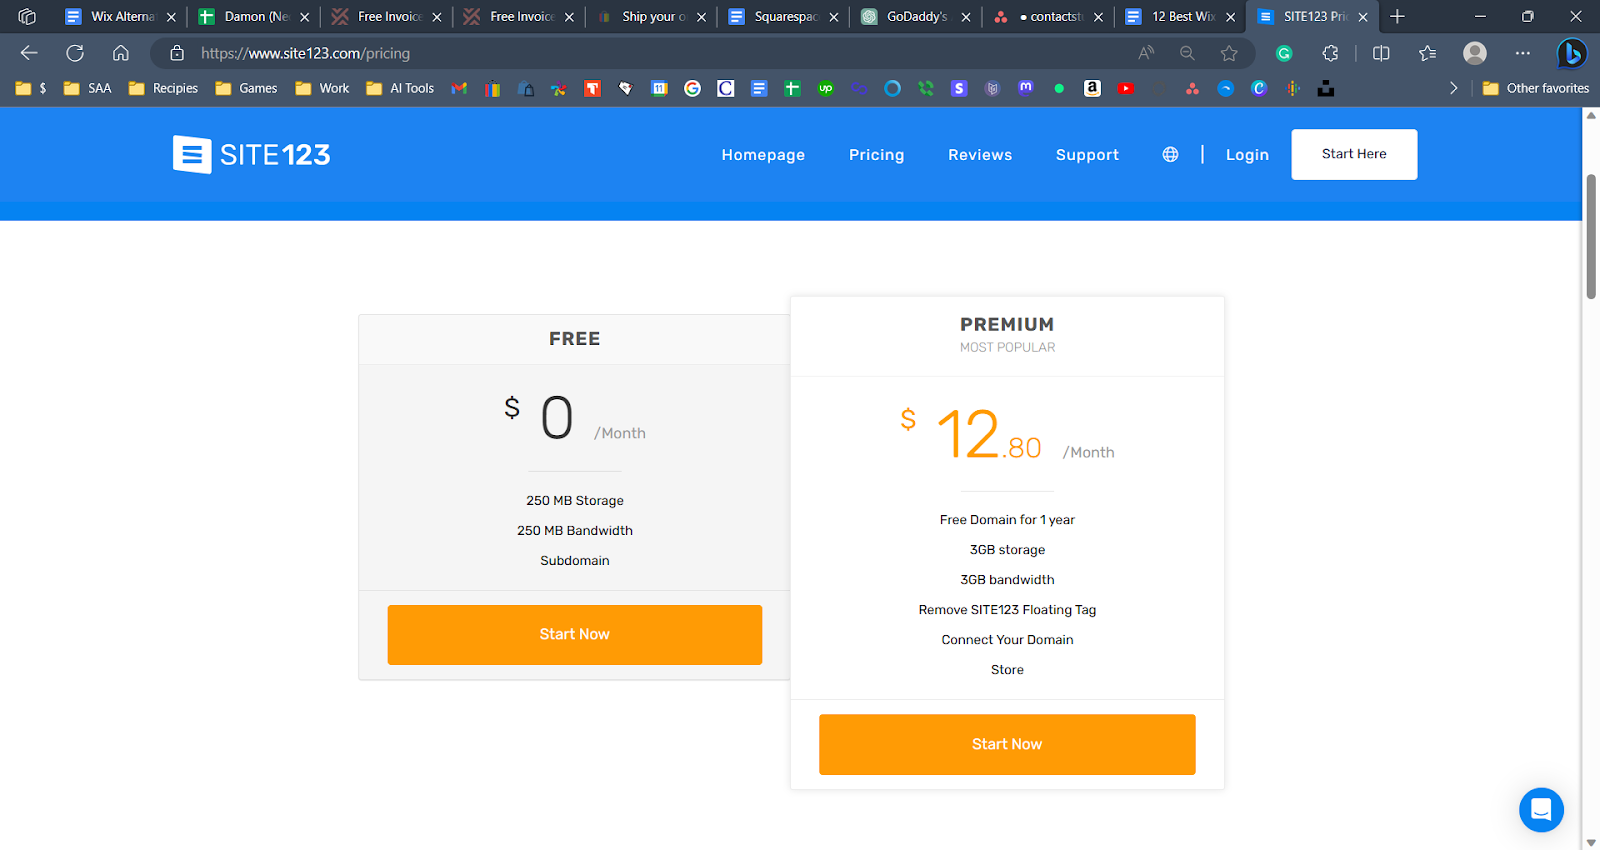 A screenshot of SITE123's pricing plans